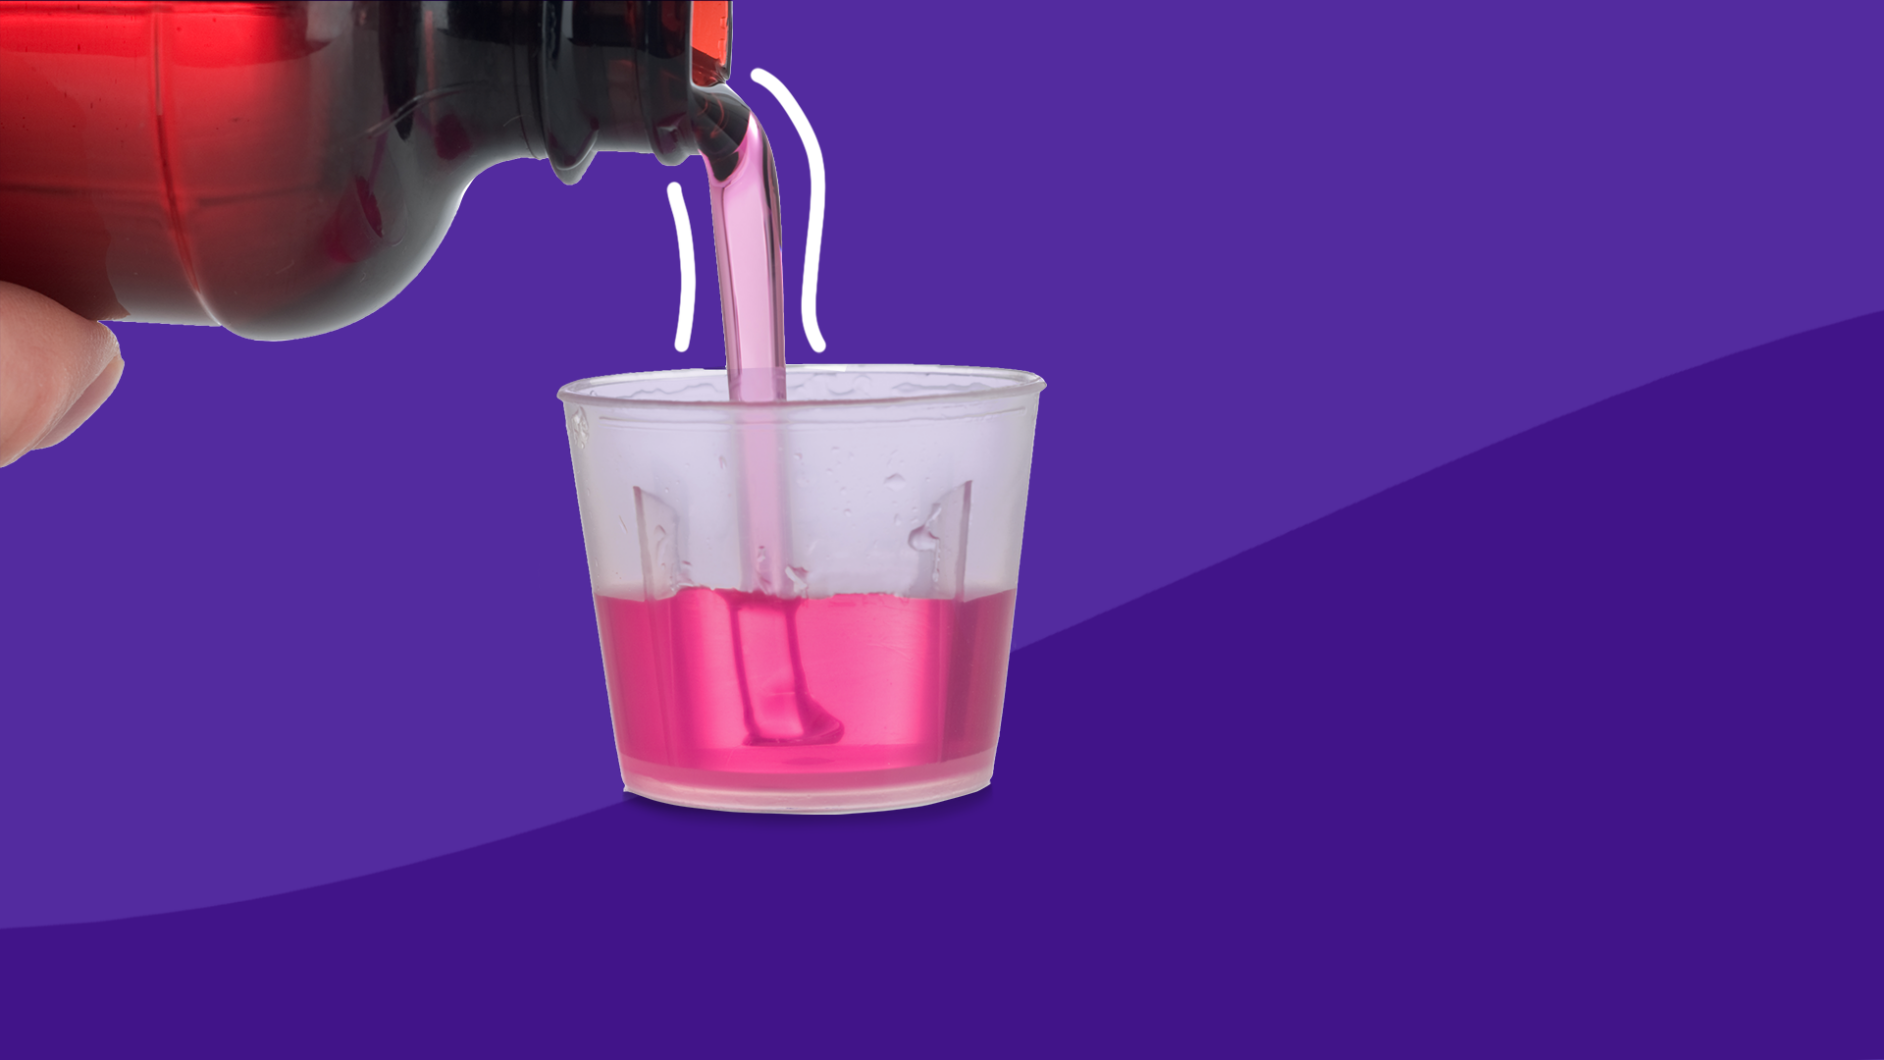 Rx syrup puring into medical measuring cup: Promethazine interactions